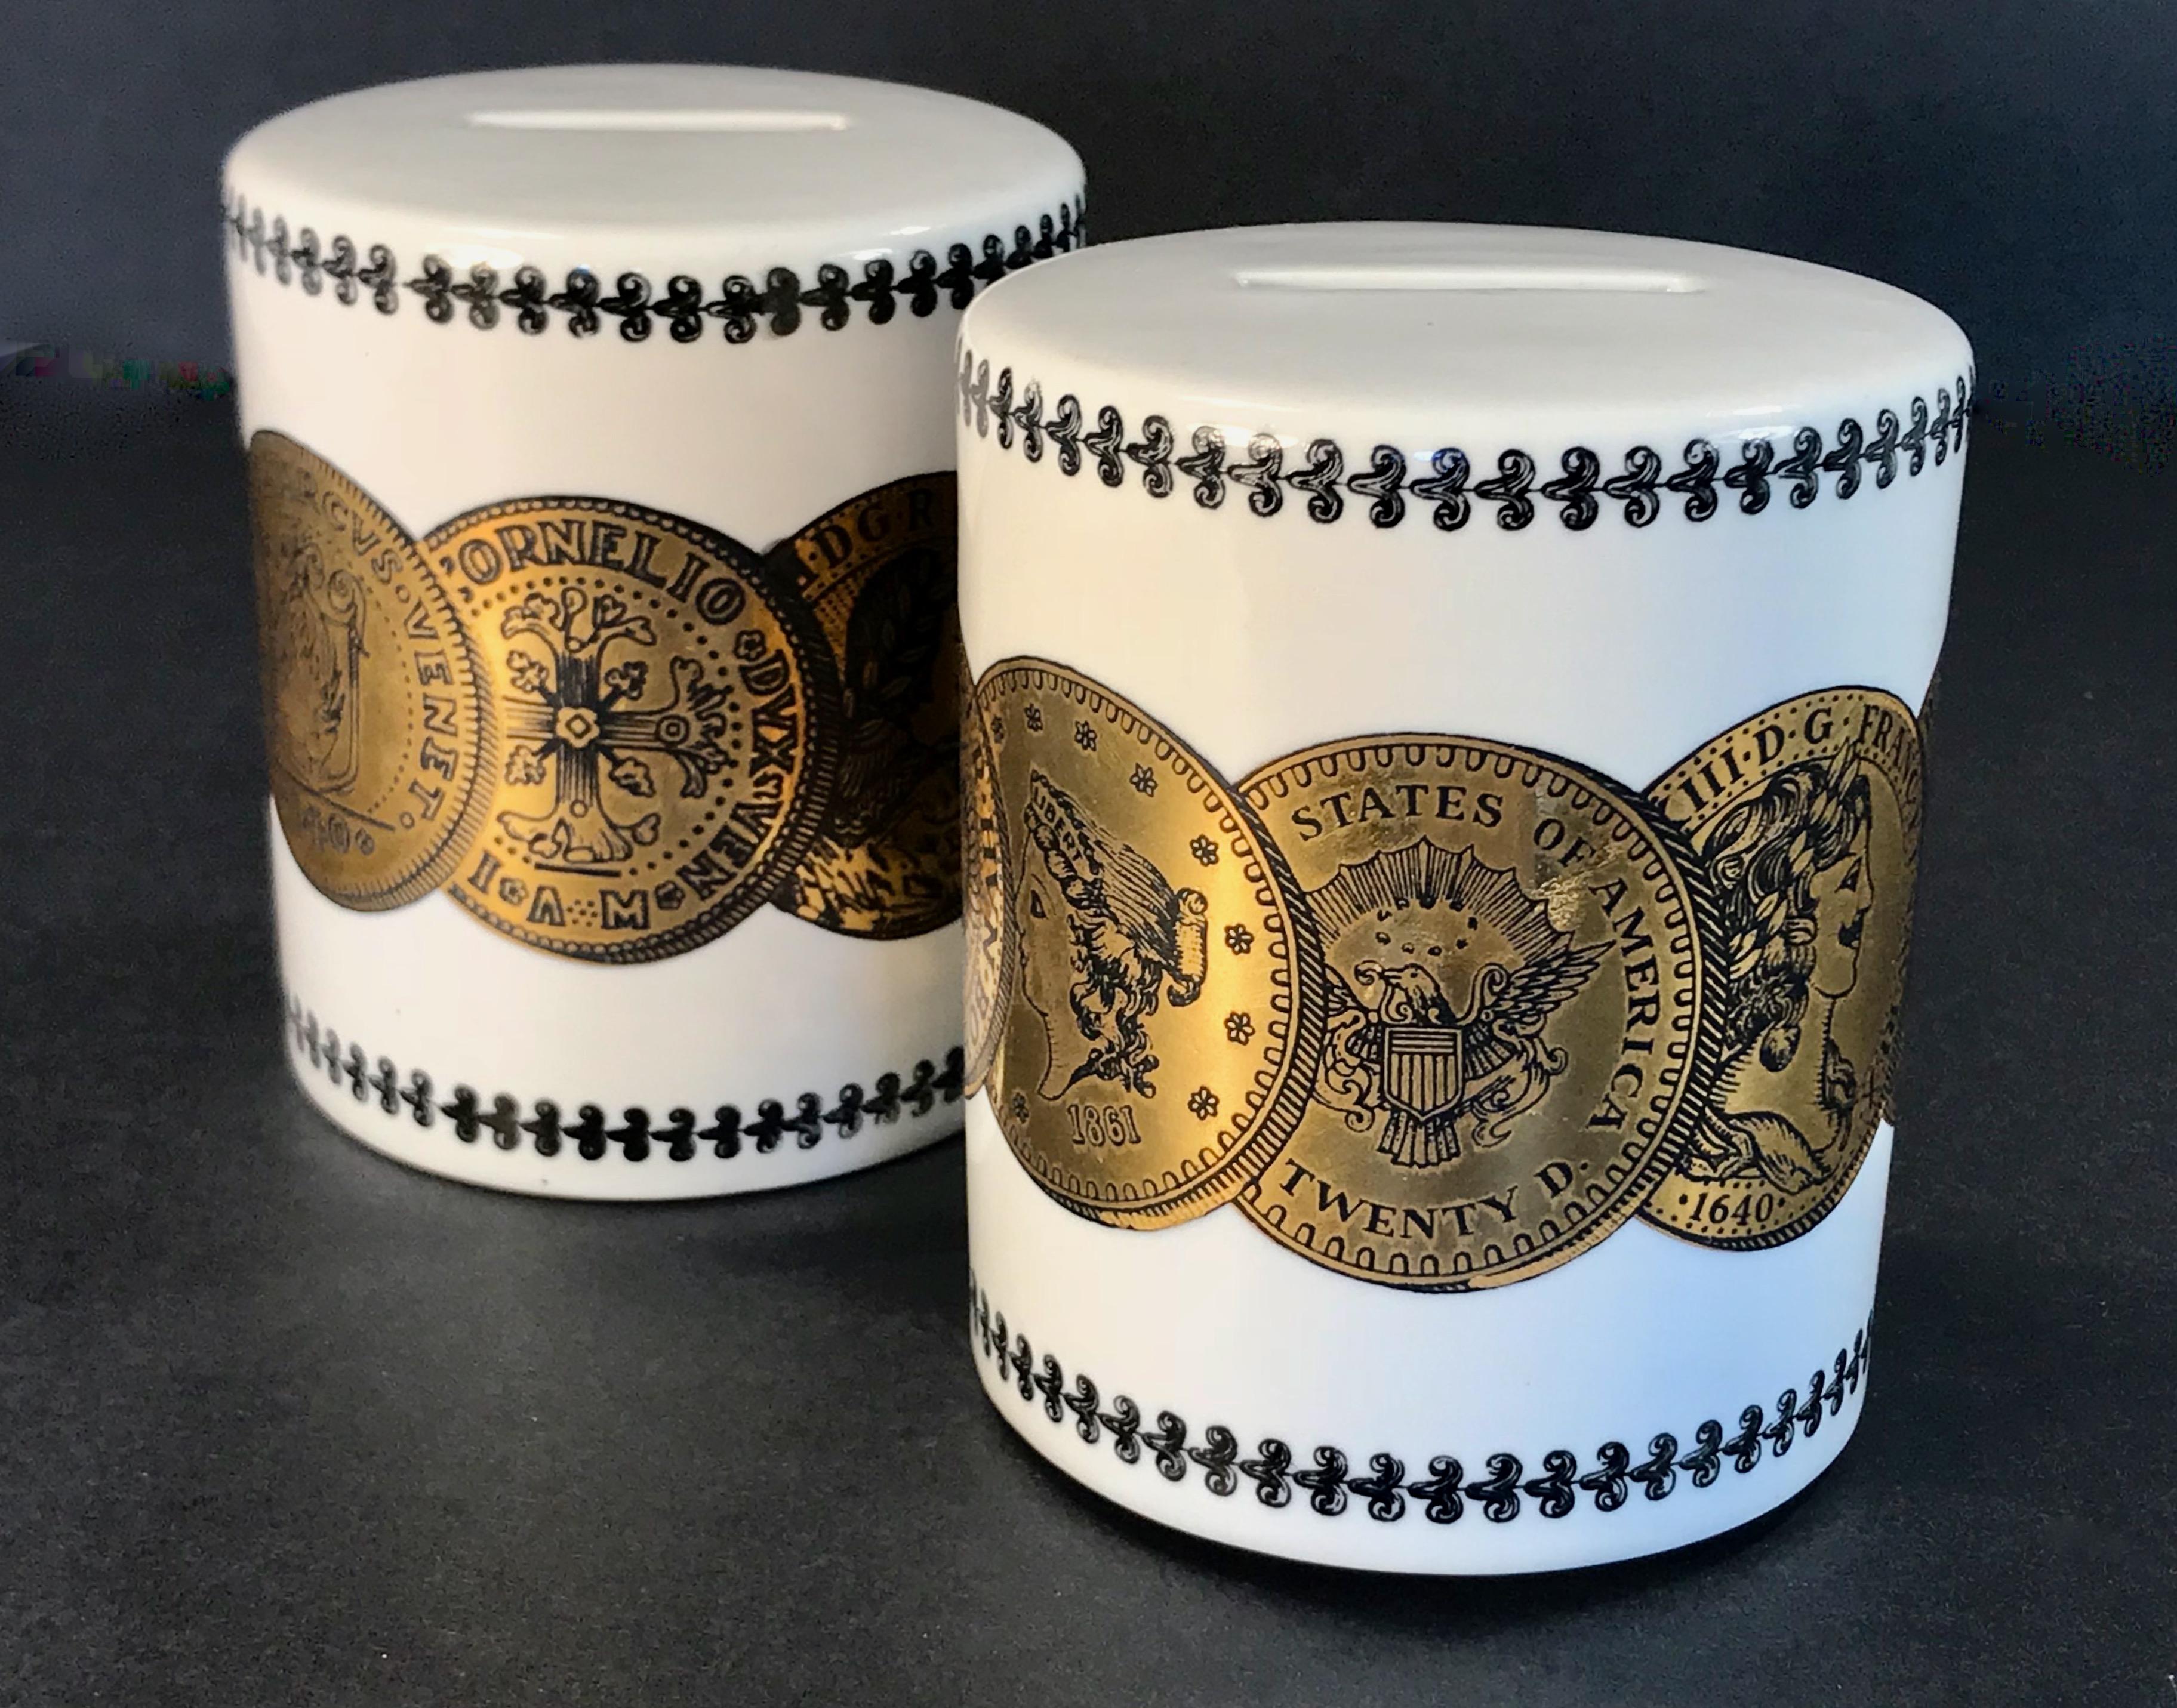 A pair of white porcelain coin or piggy banks designed by Piero Fornasetti for Neiman Marcus. Gilt coin motif with scrollwork detailing at top and bottom. These retain the original stoppers and we have added cork stoppers. Coin banks by Fornasetti